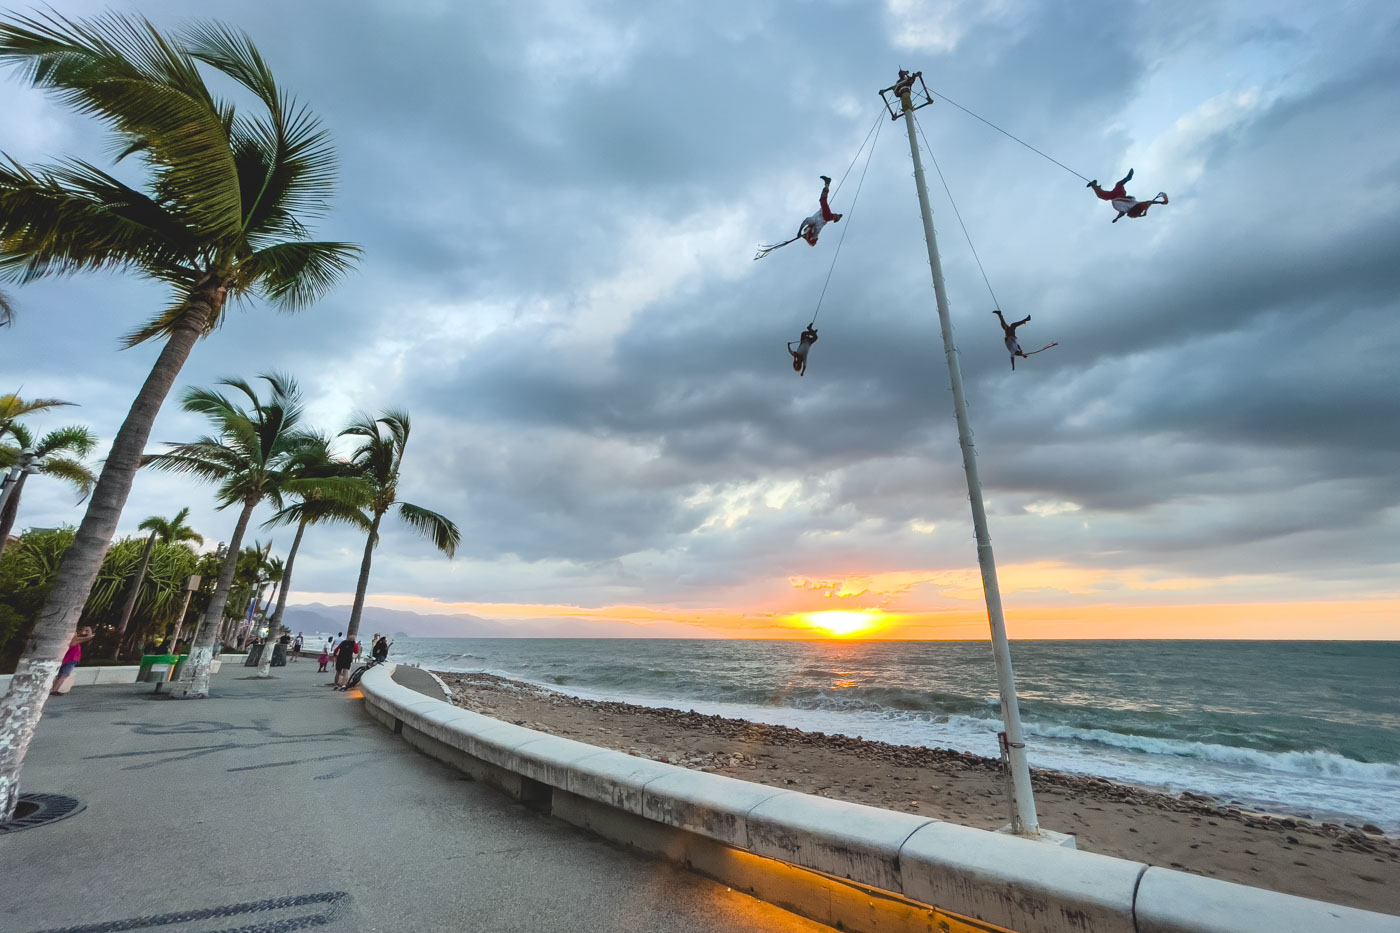 Four people suspended from a tall white pole by rope while swinging around above a beach at sunset.